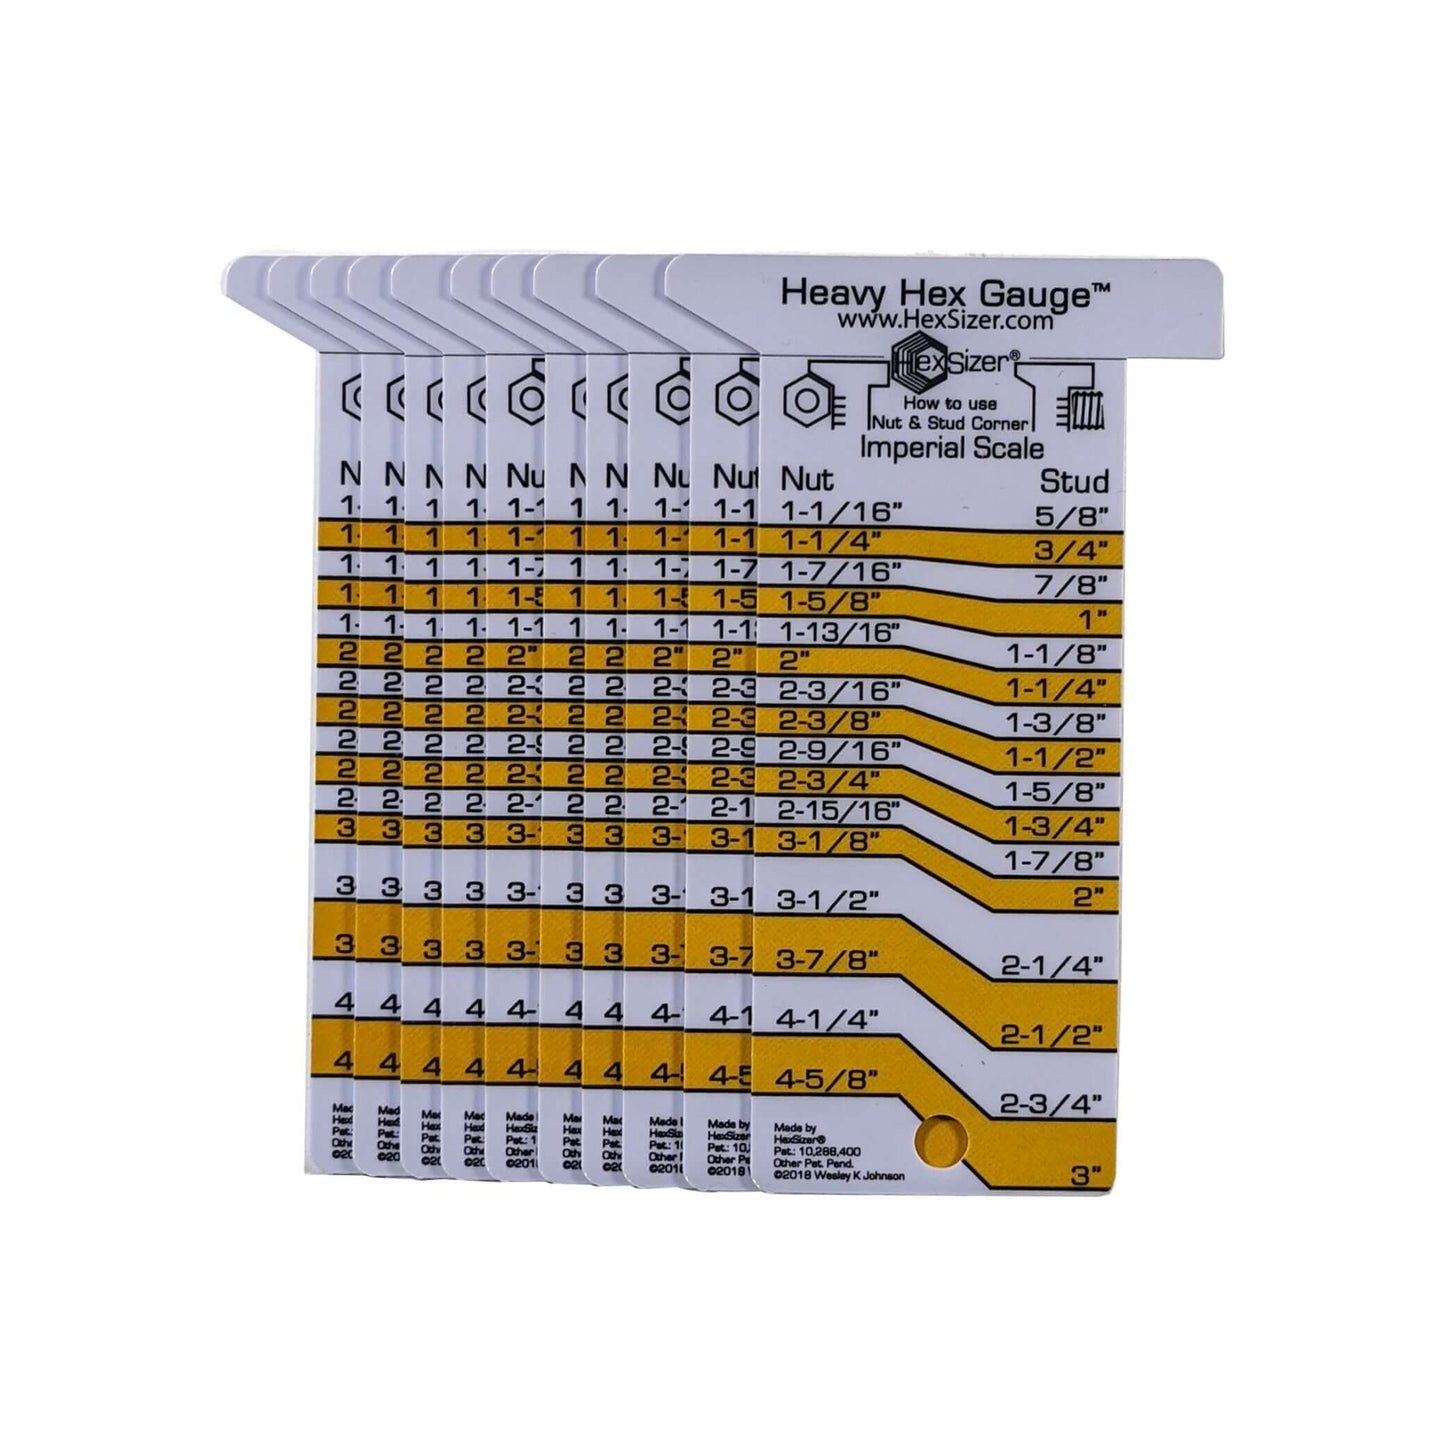 10 Pack without sleeves - Yellow on White - Plastic Heavy Hex Gauge - Inch Only